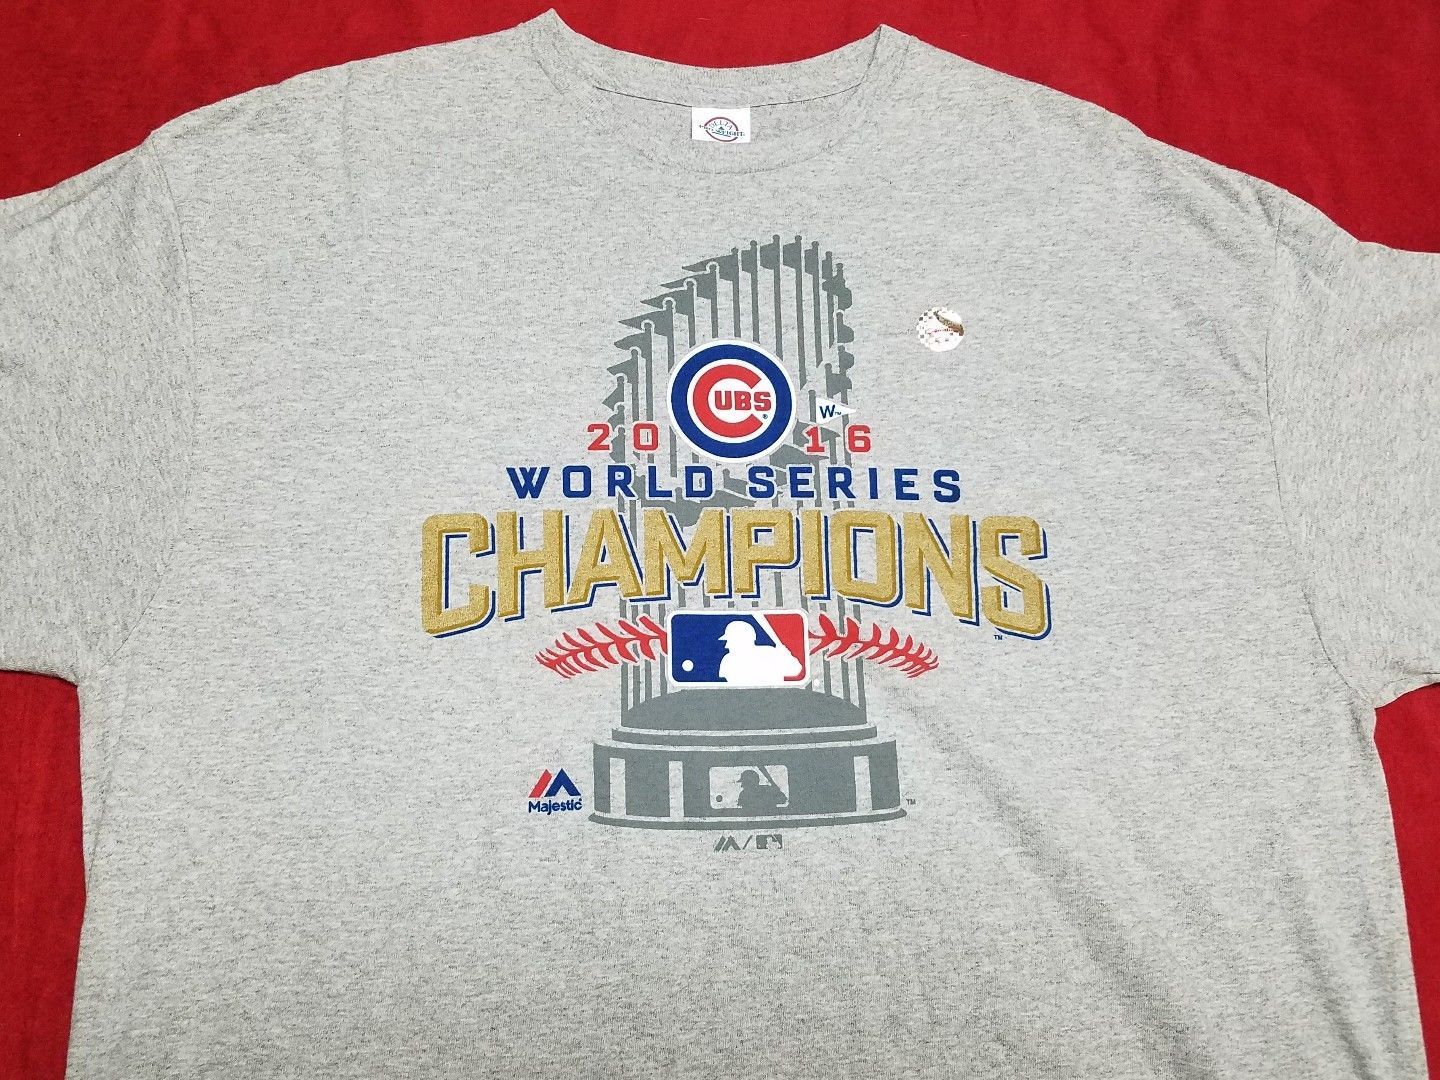 Primary image for 2016 Chicago Cubs World Series Tee Shirt Grey Brand New XLARGE Great Shirt!